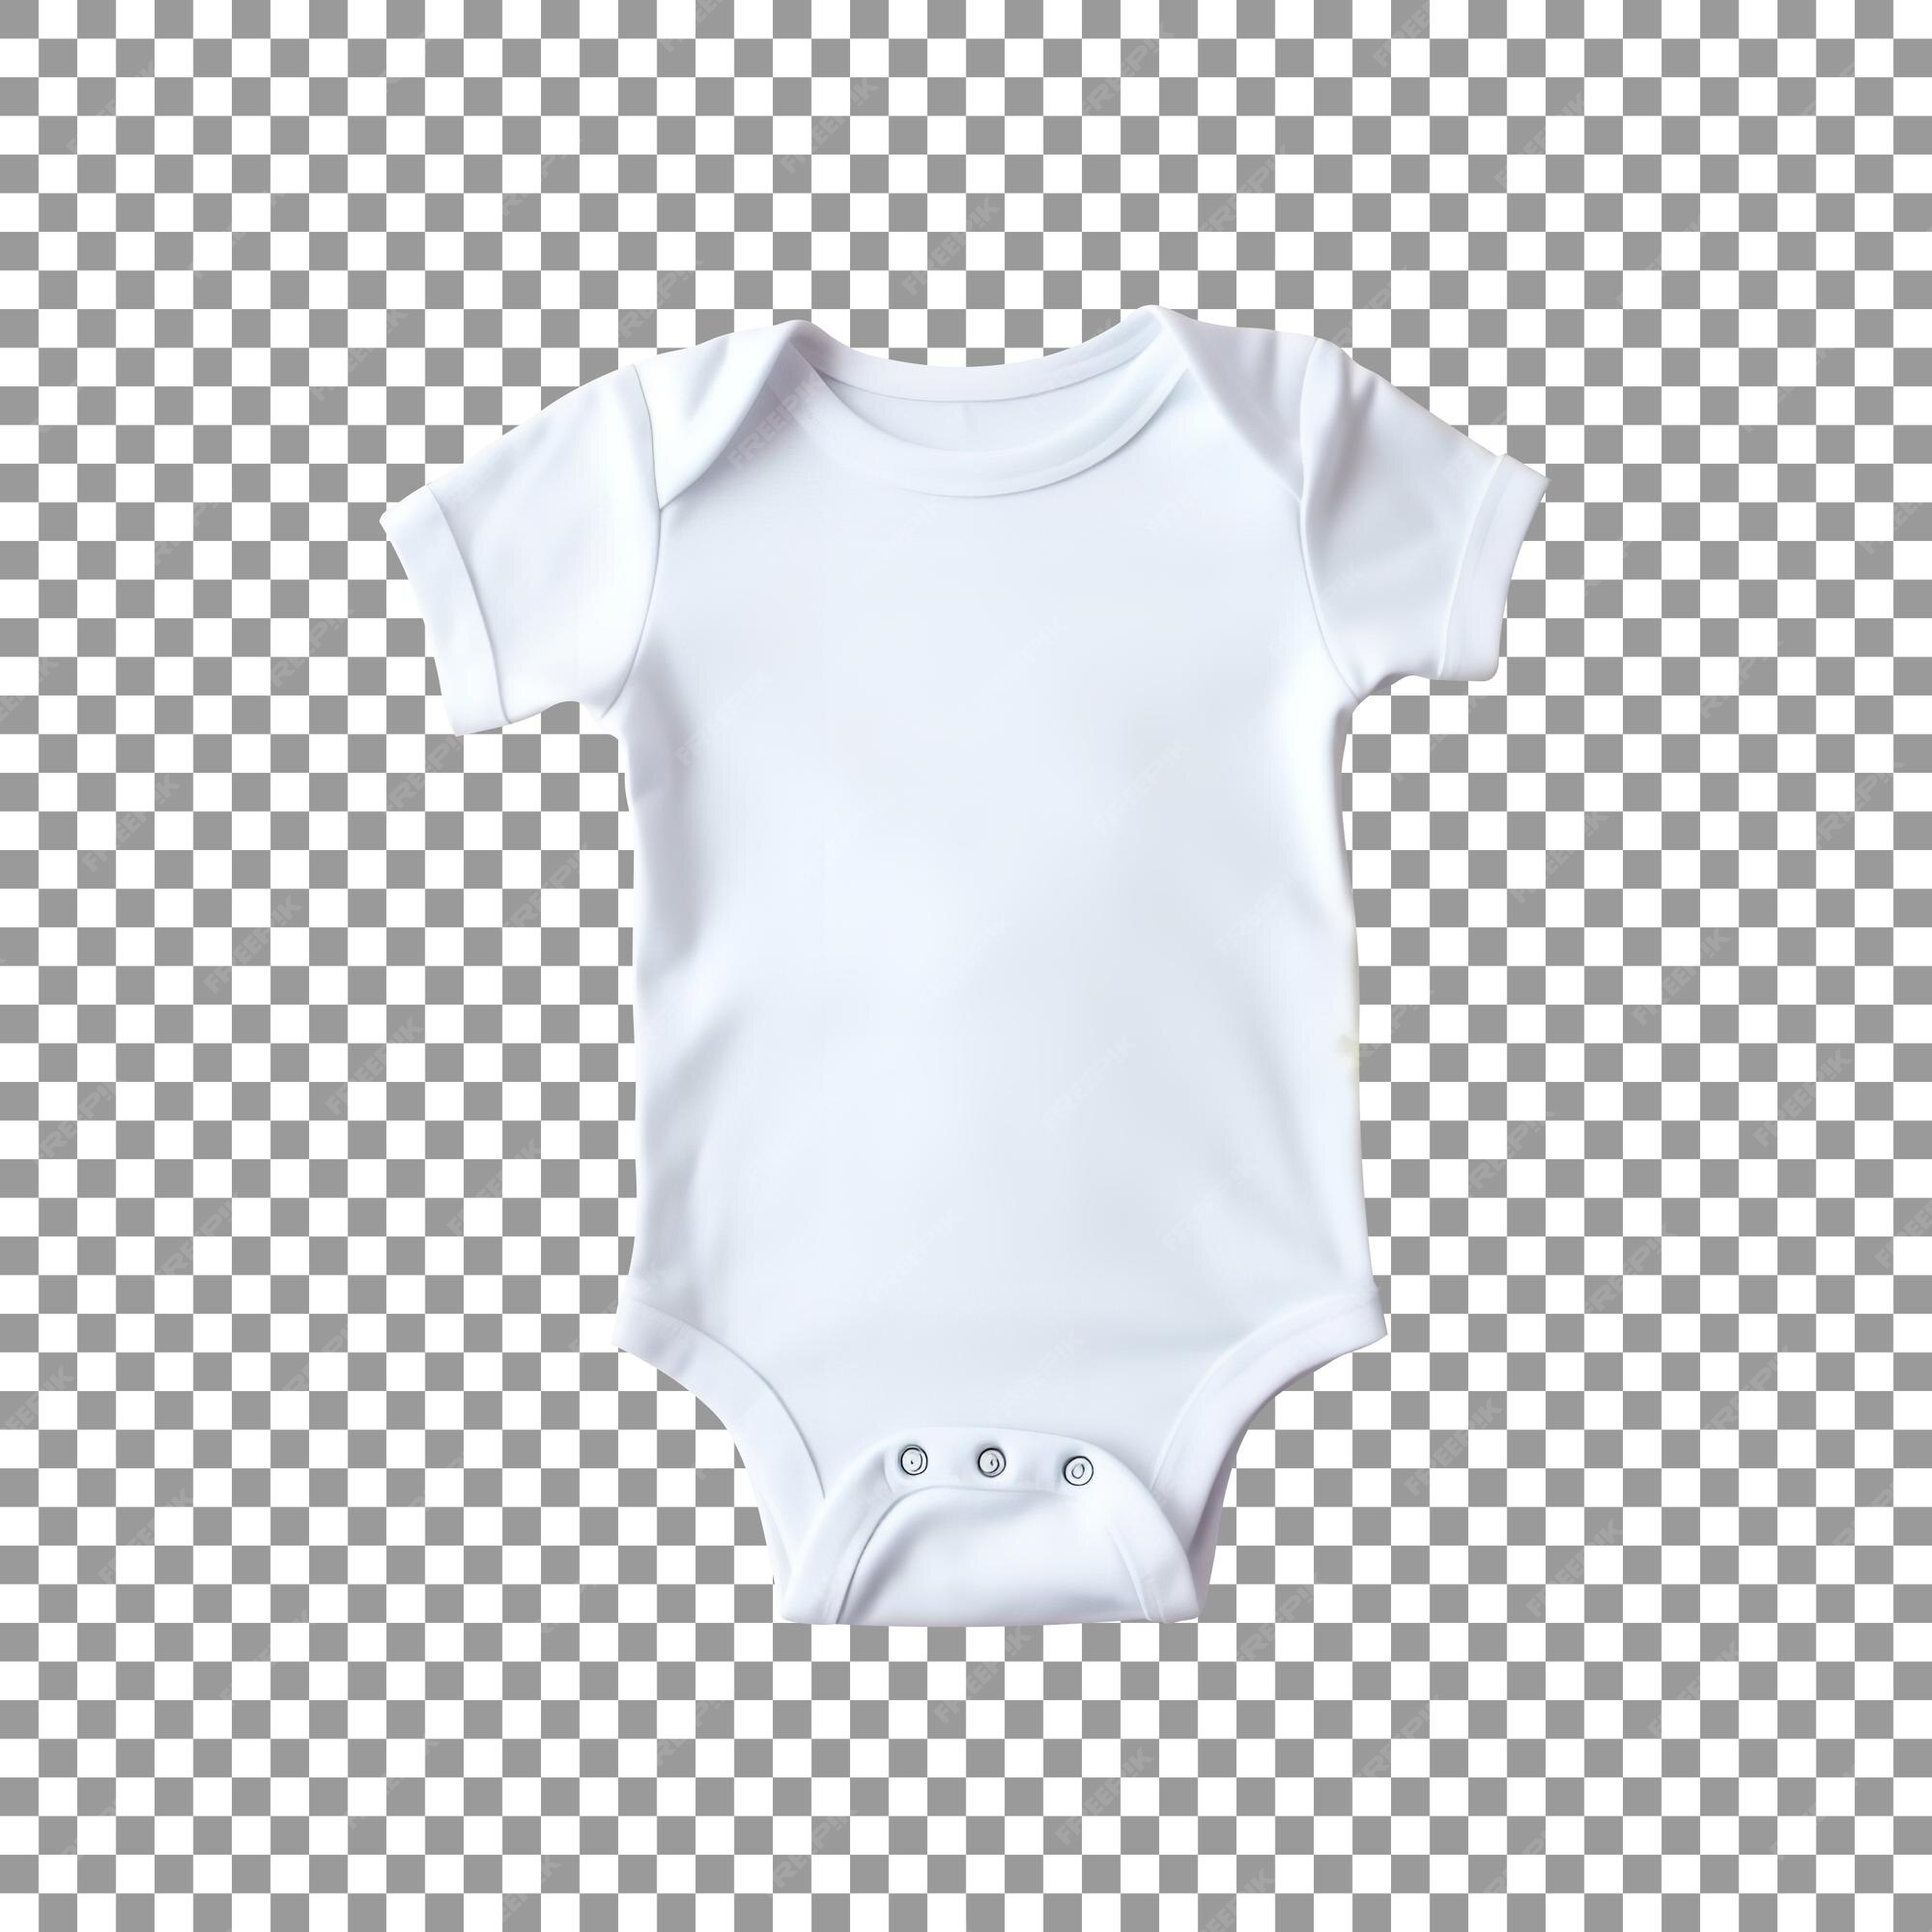 Premium PSD  Blank white baby boy romper isolated on transparent